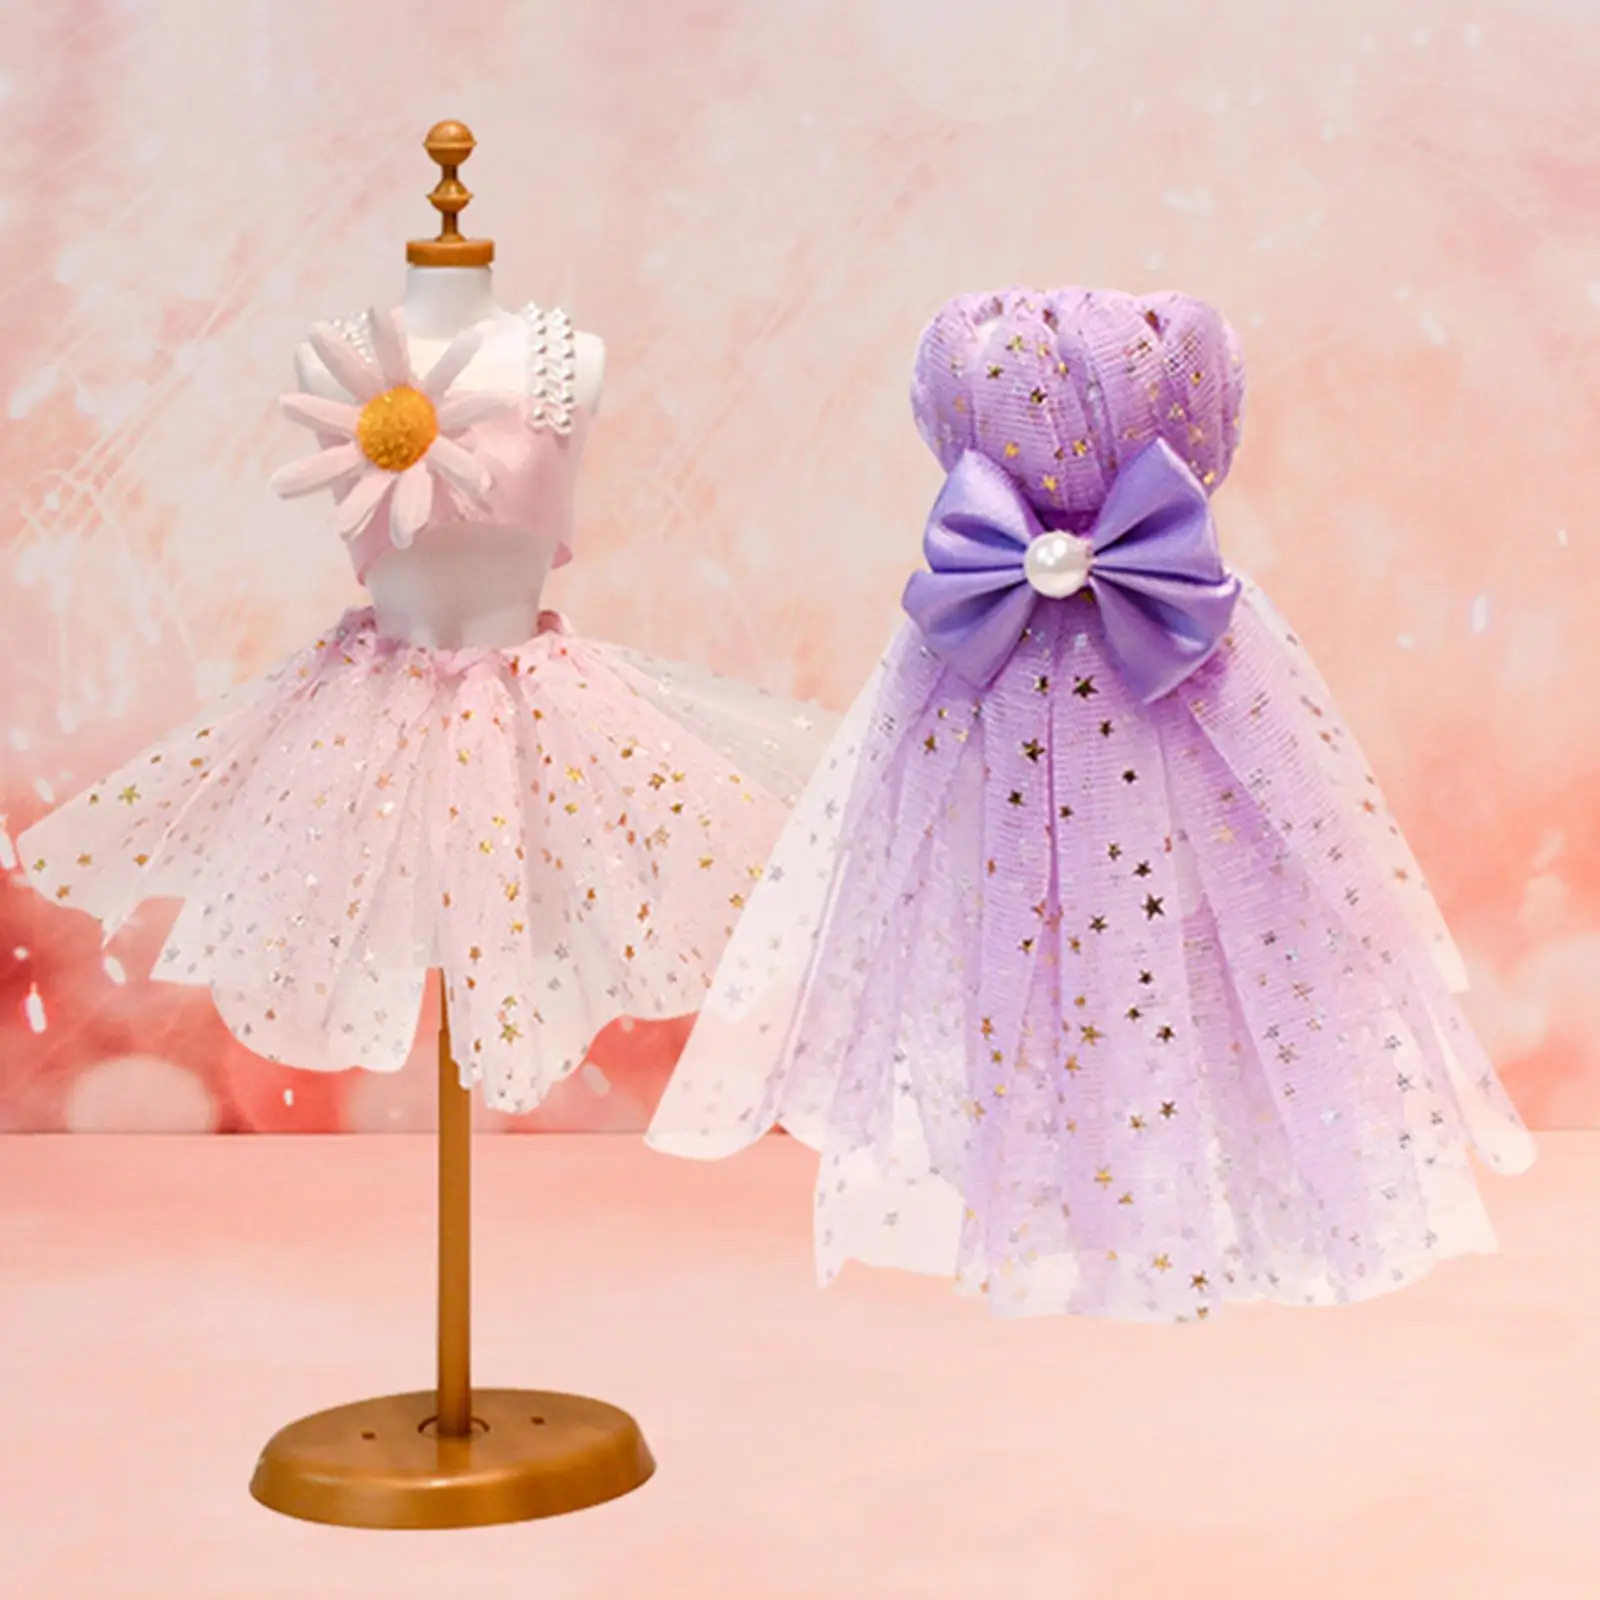 Fashion Designer for Kids with Reusable Mannequins, Fabric and Accessories Doll Clothes Dress DIY Kids` Sewing Kits for Children